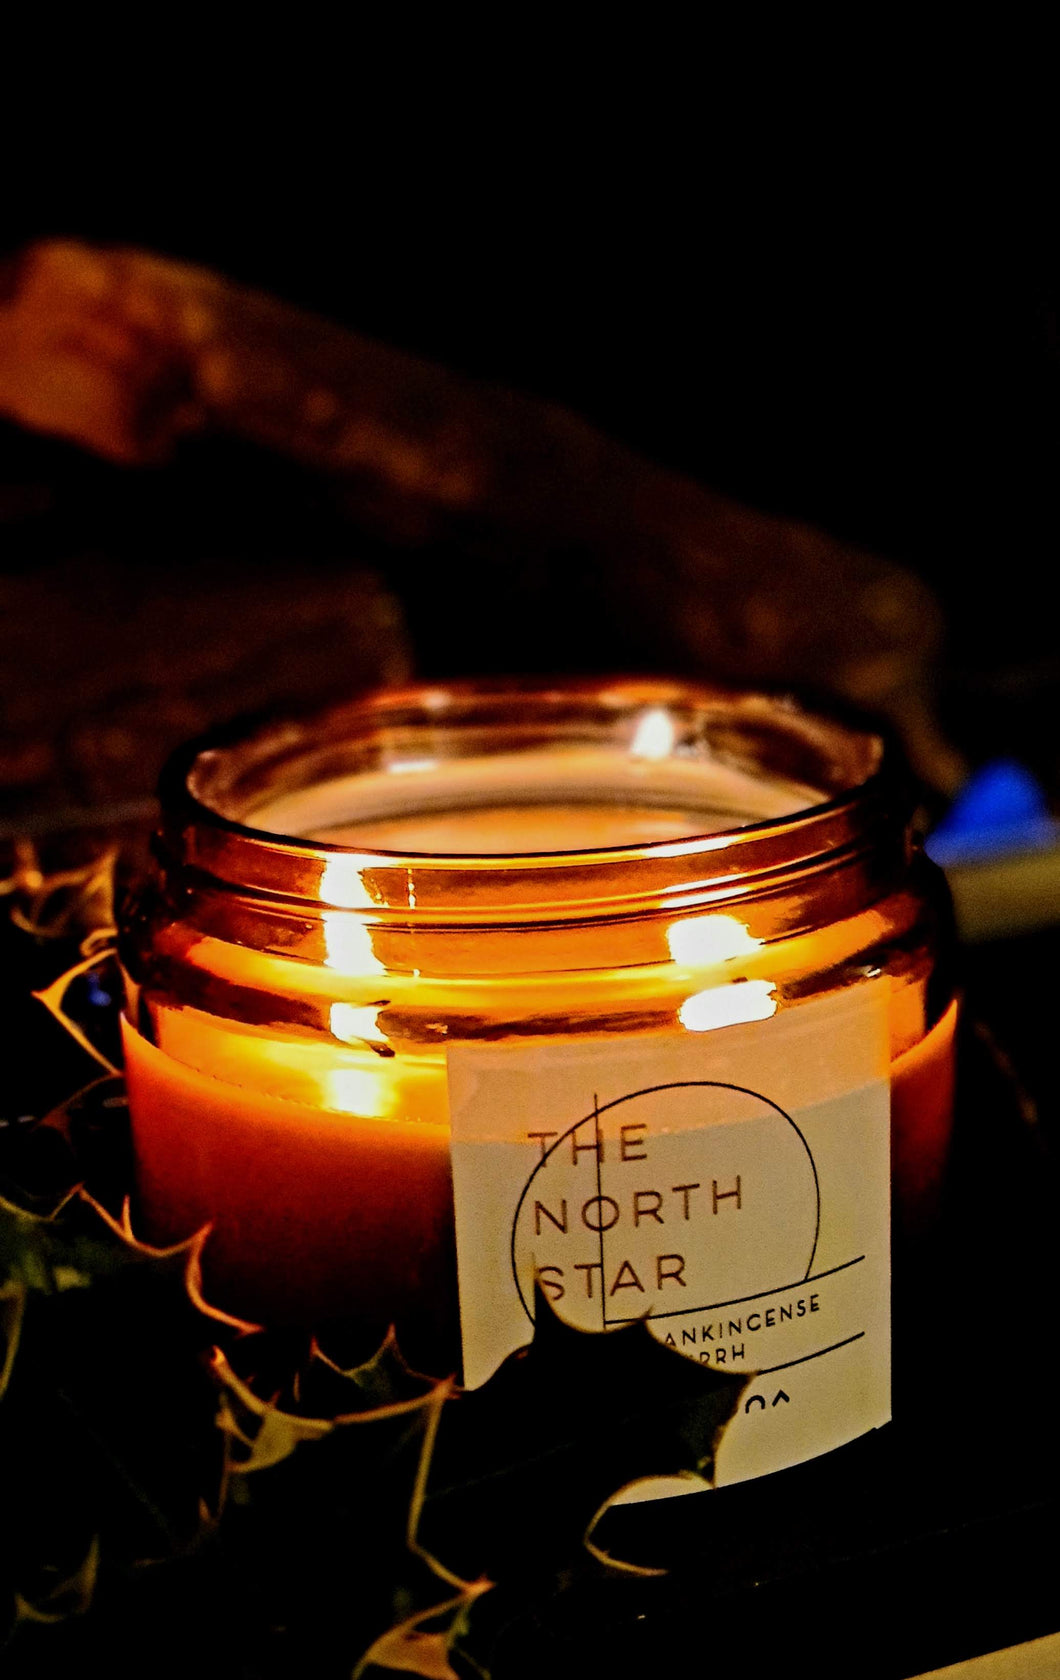 The North Star - large 3 wick